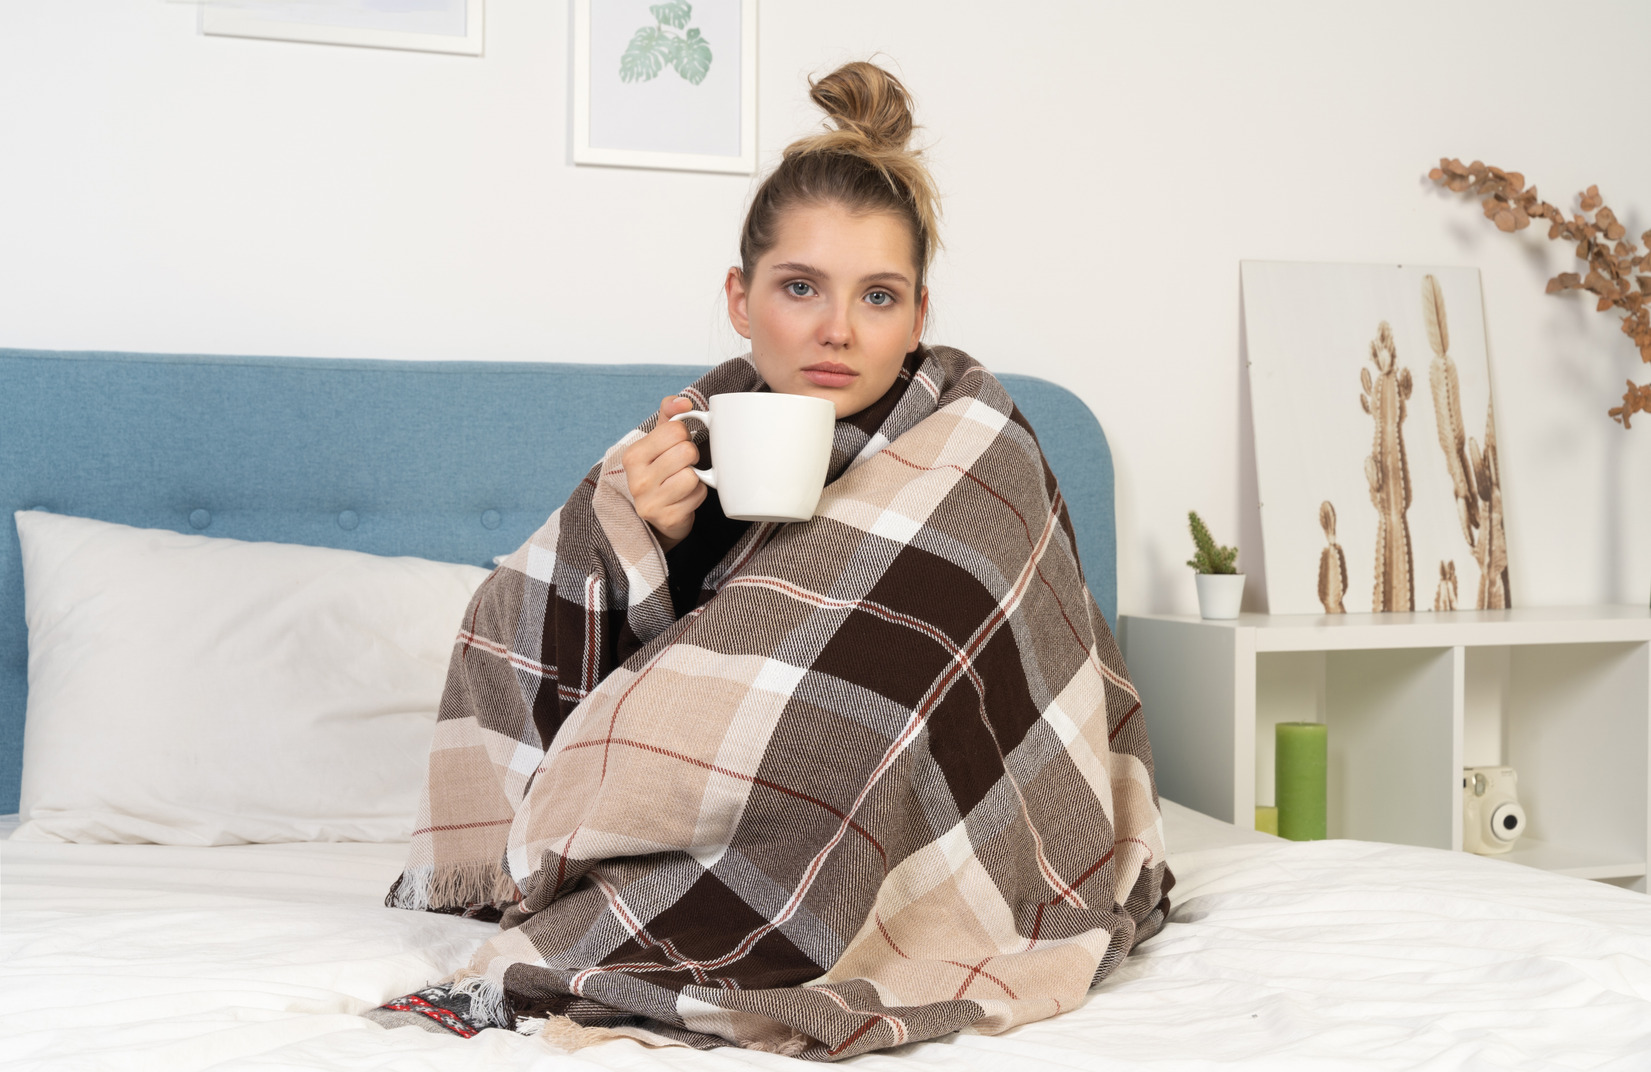 Front view of an ill young lady wrapped in checked blanket in bed holding a cup of tea